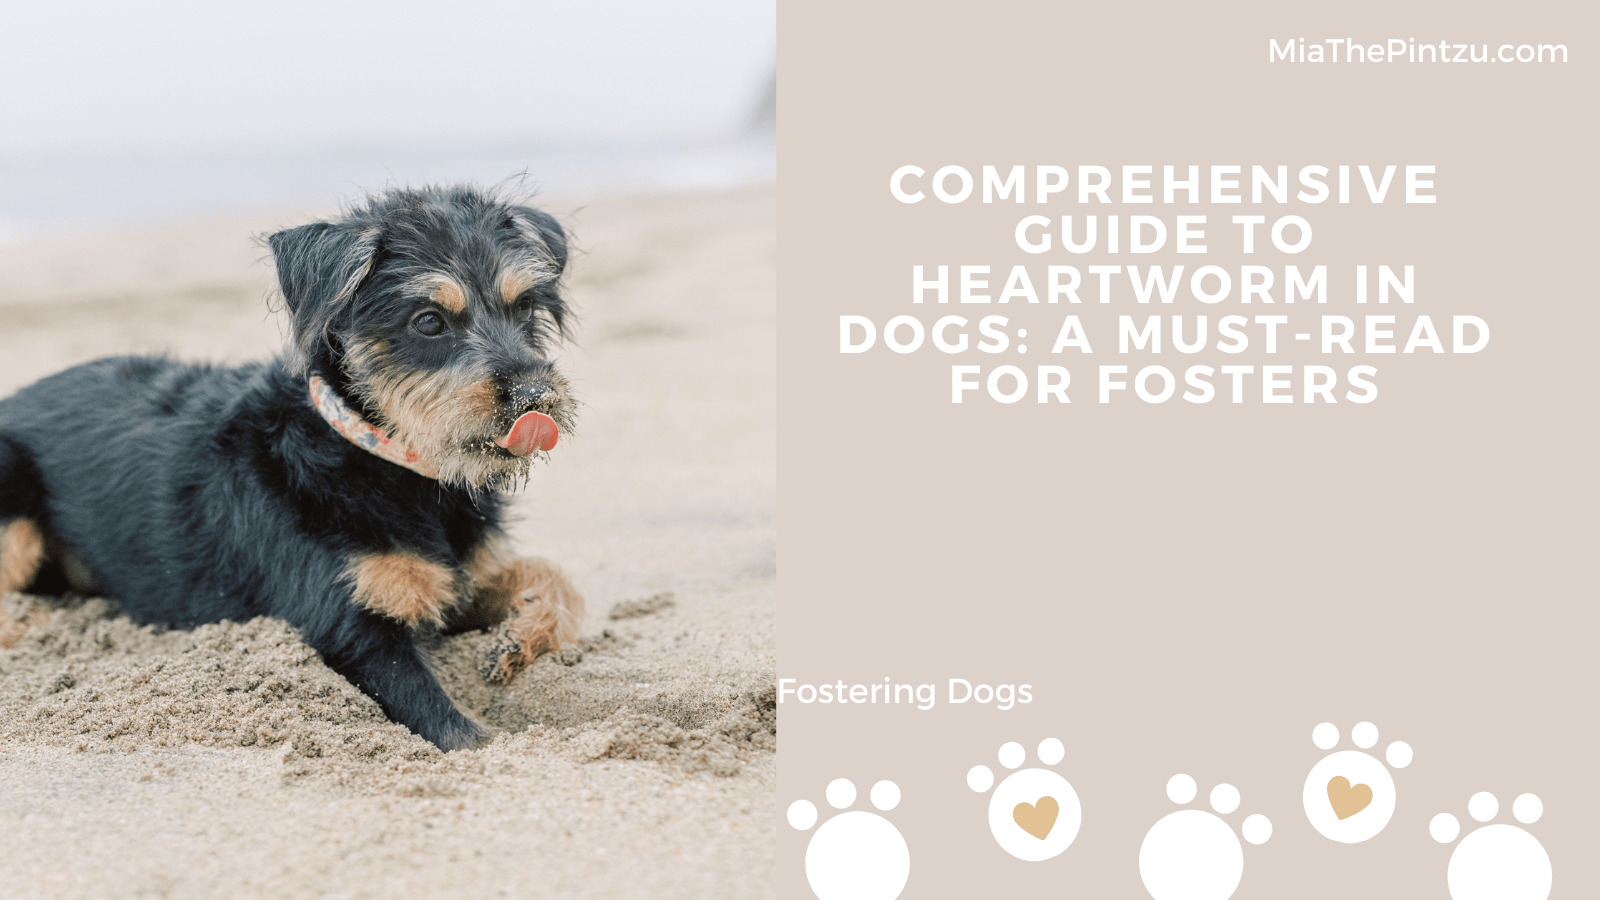 Comprehensive Guide to Heartworm in Dogs: A Must-Read for Fosters